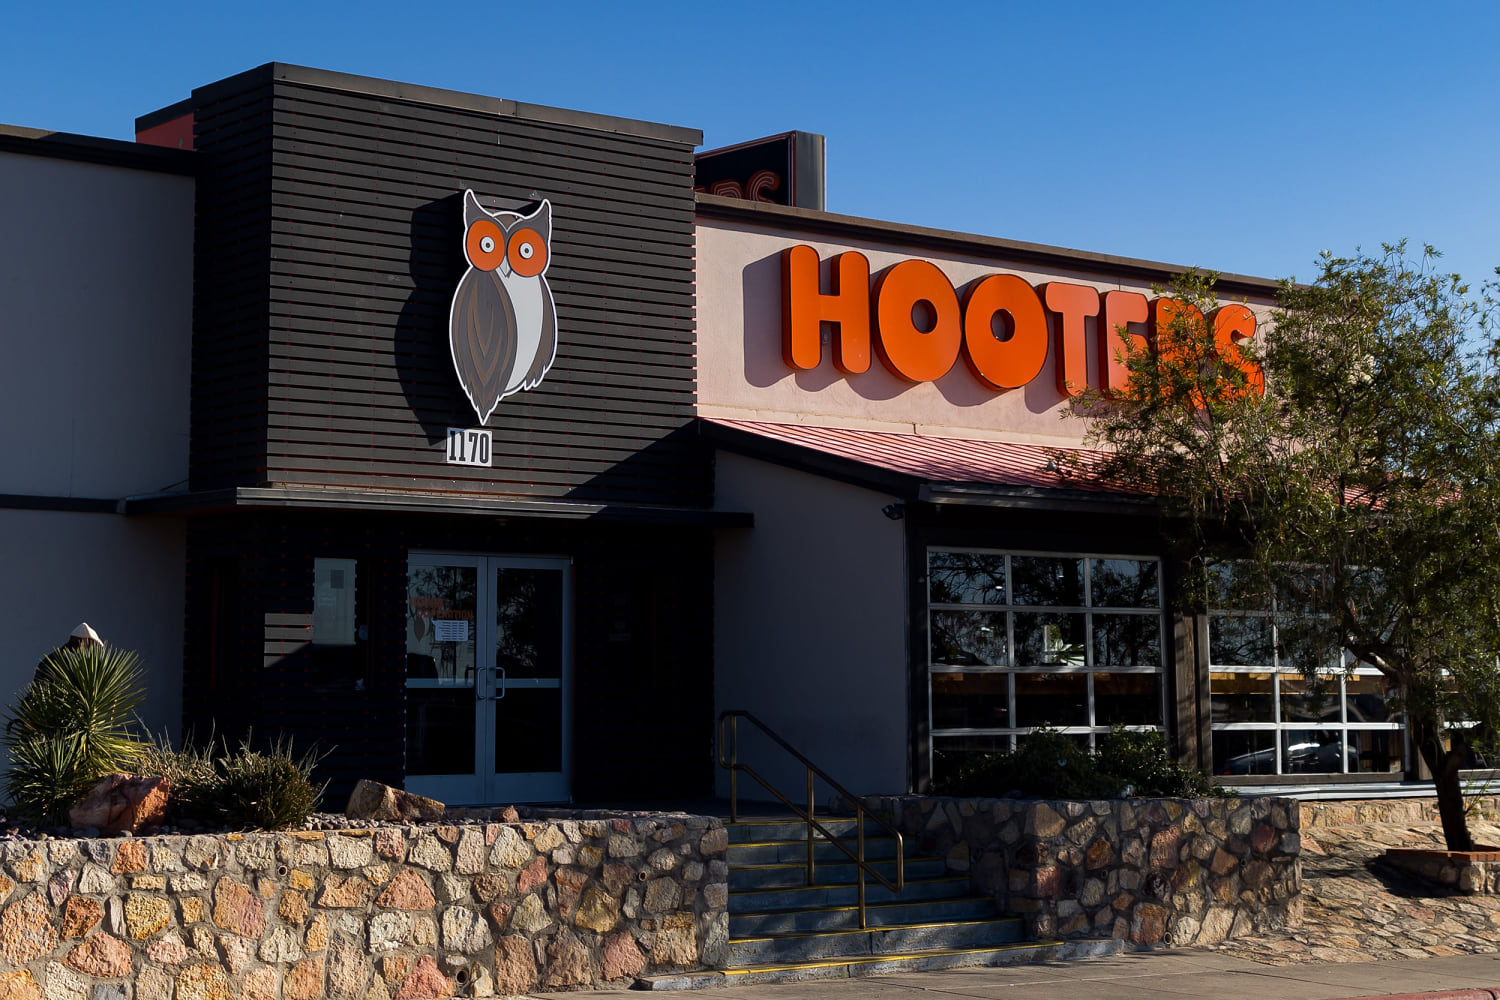 Hooters to close 'underperforming' restaurants amid broader industry woes